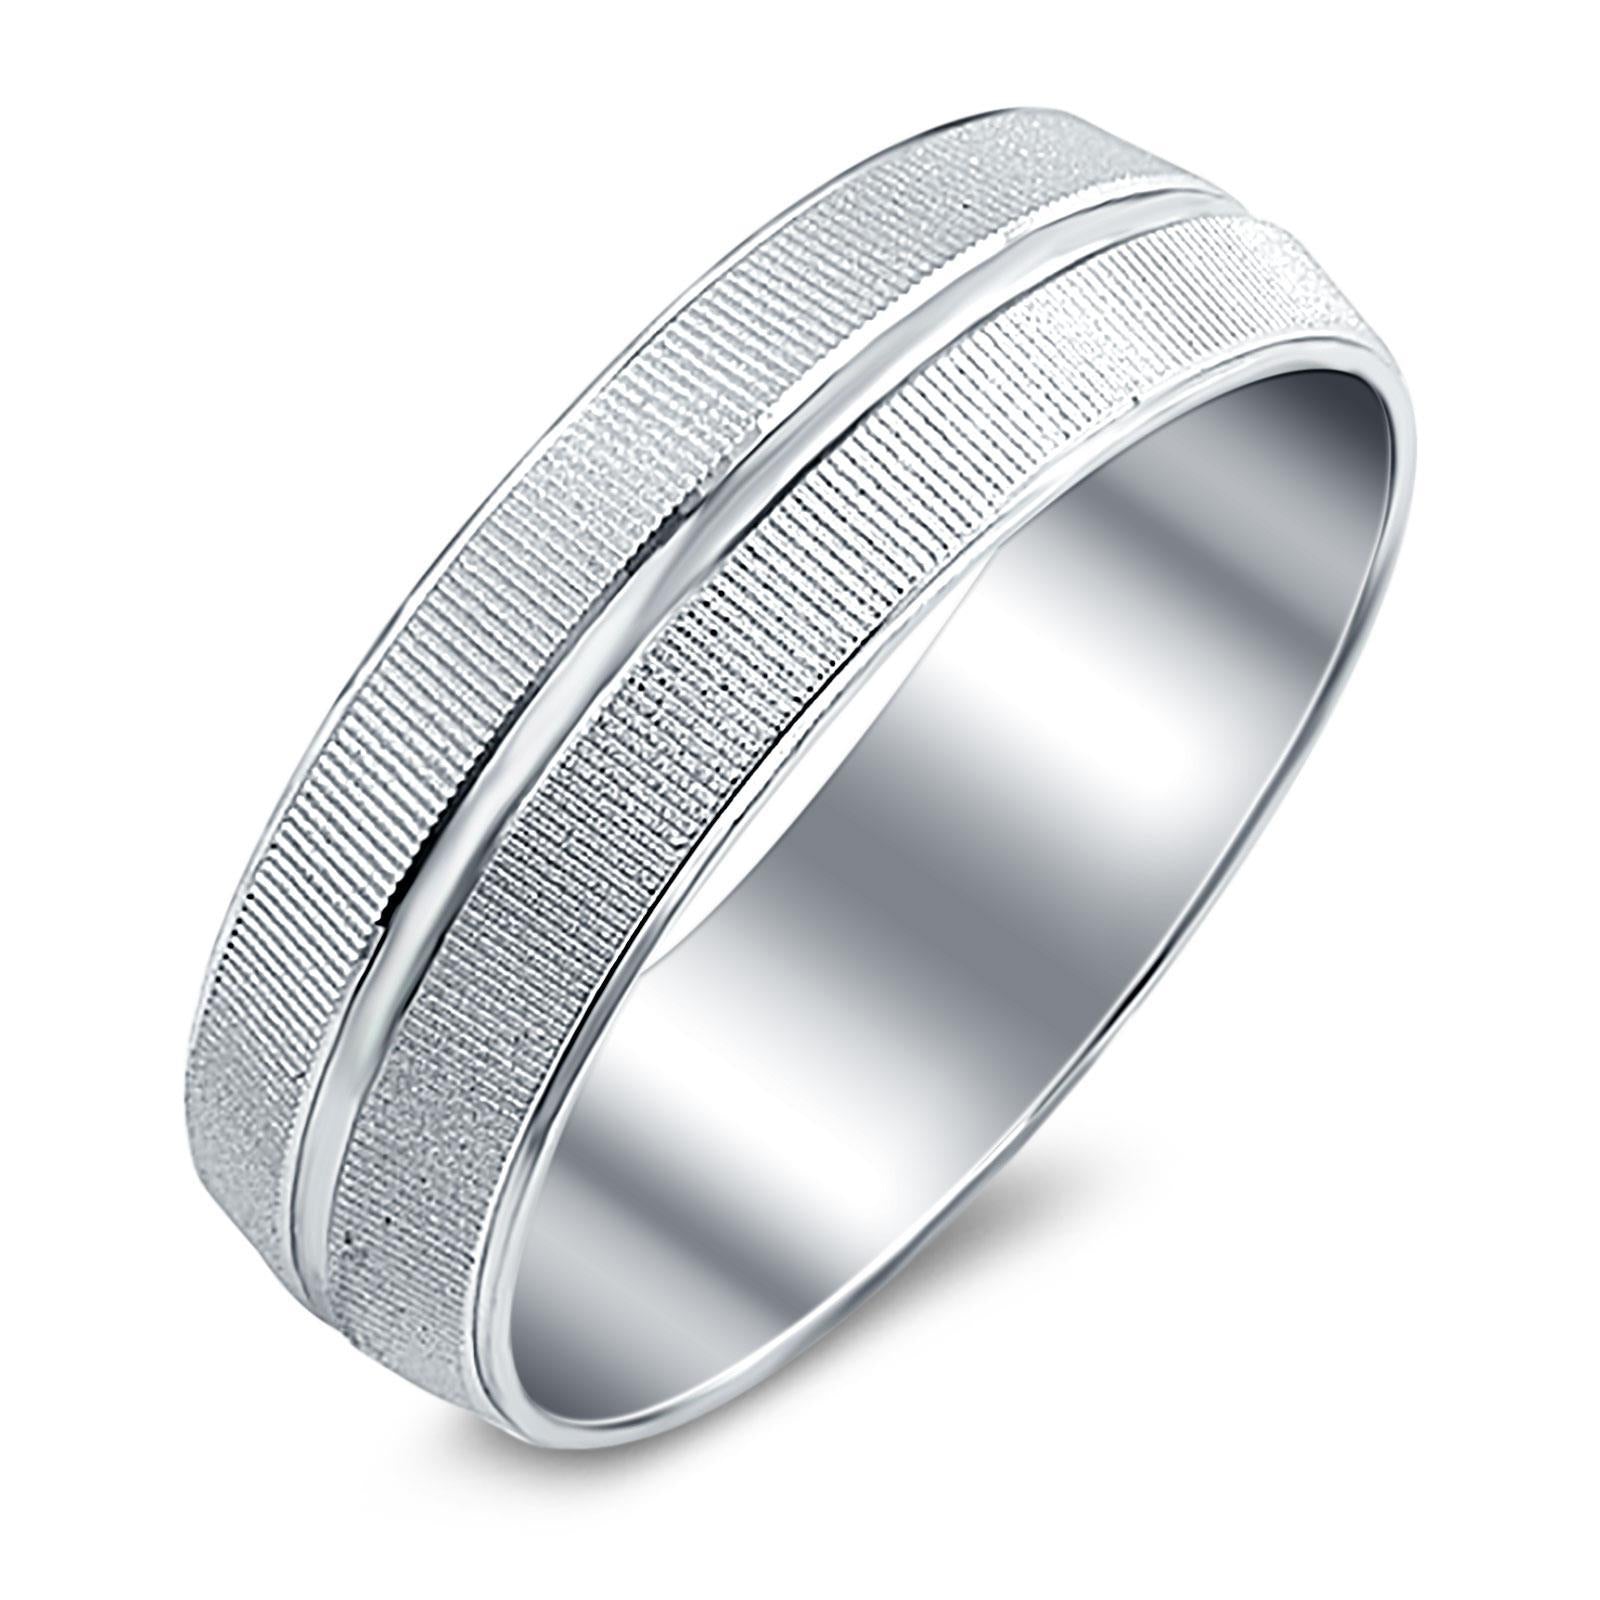 Solid Silver Wedding Band Ring 925 Sterling Silver (6mm)